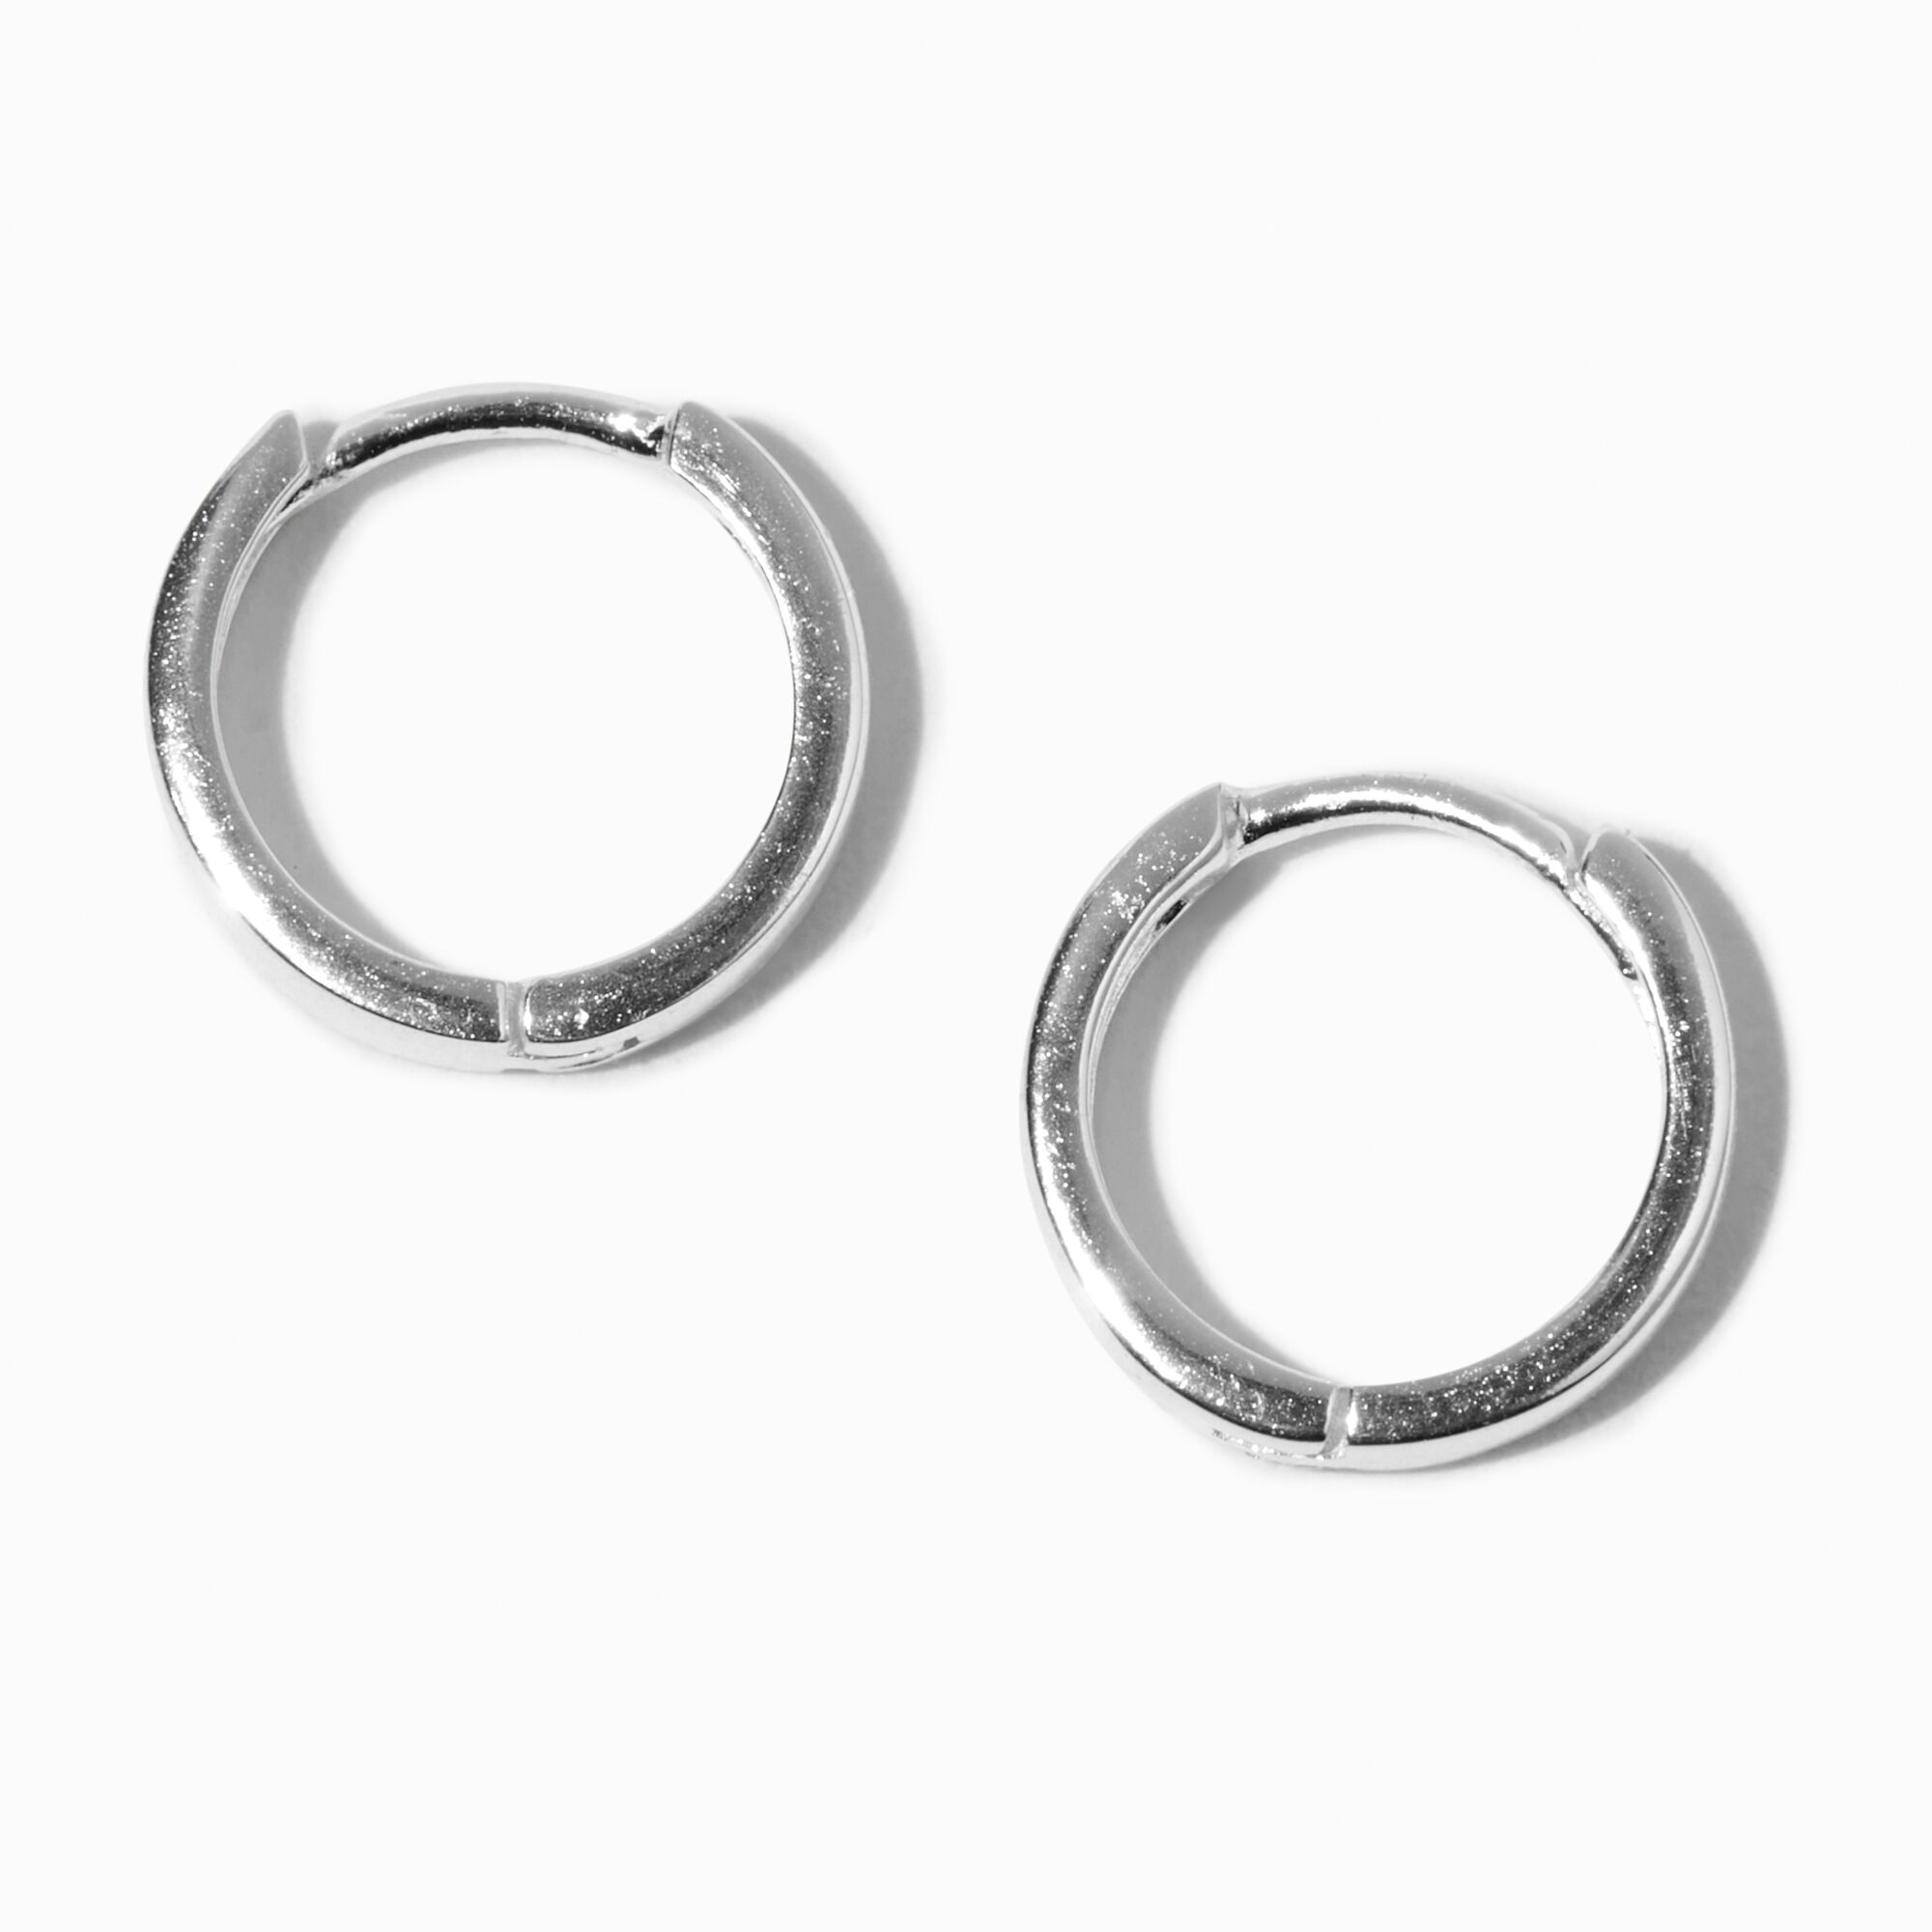 View C Luxe By Claires 8MM Clicker Hoop Earrings Silver information